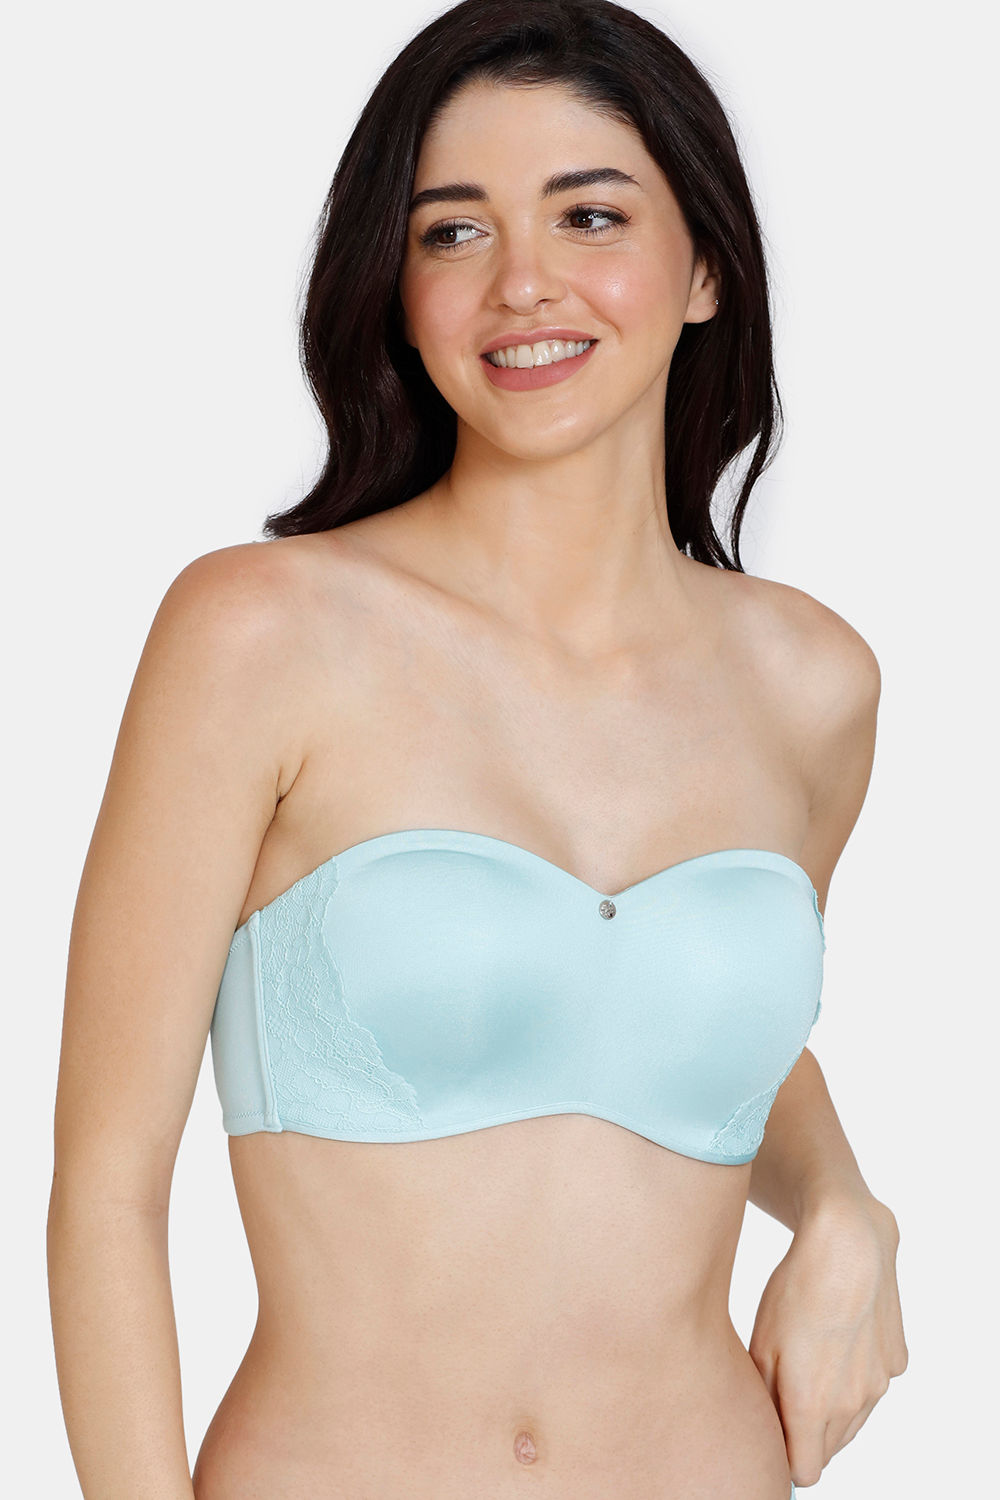 Buy Women's Tube Bra, Multicolor Wirefree, Strapless, Non Padded